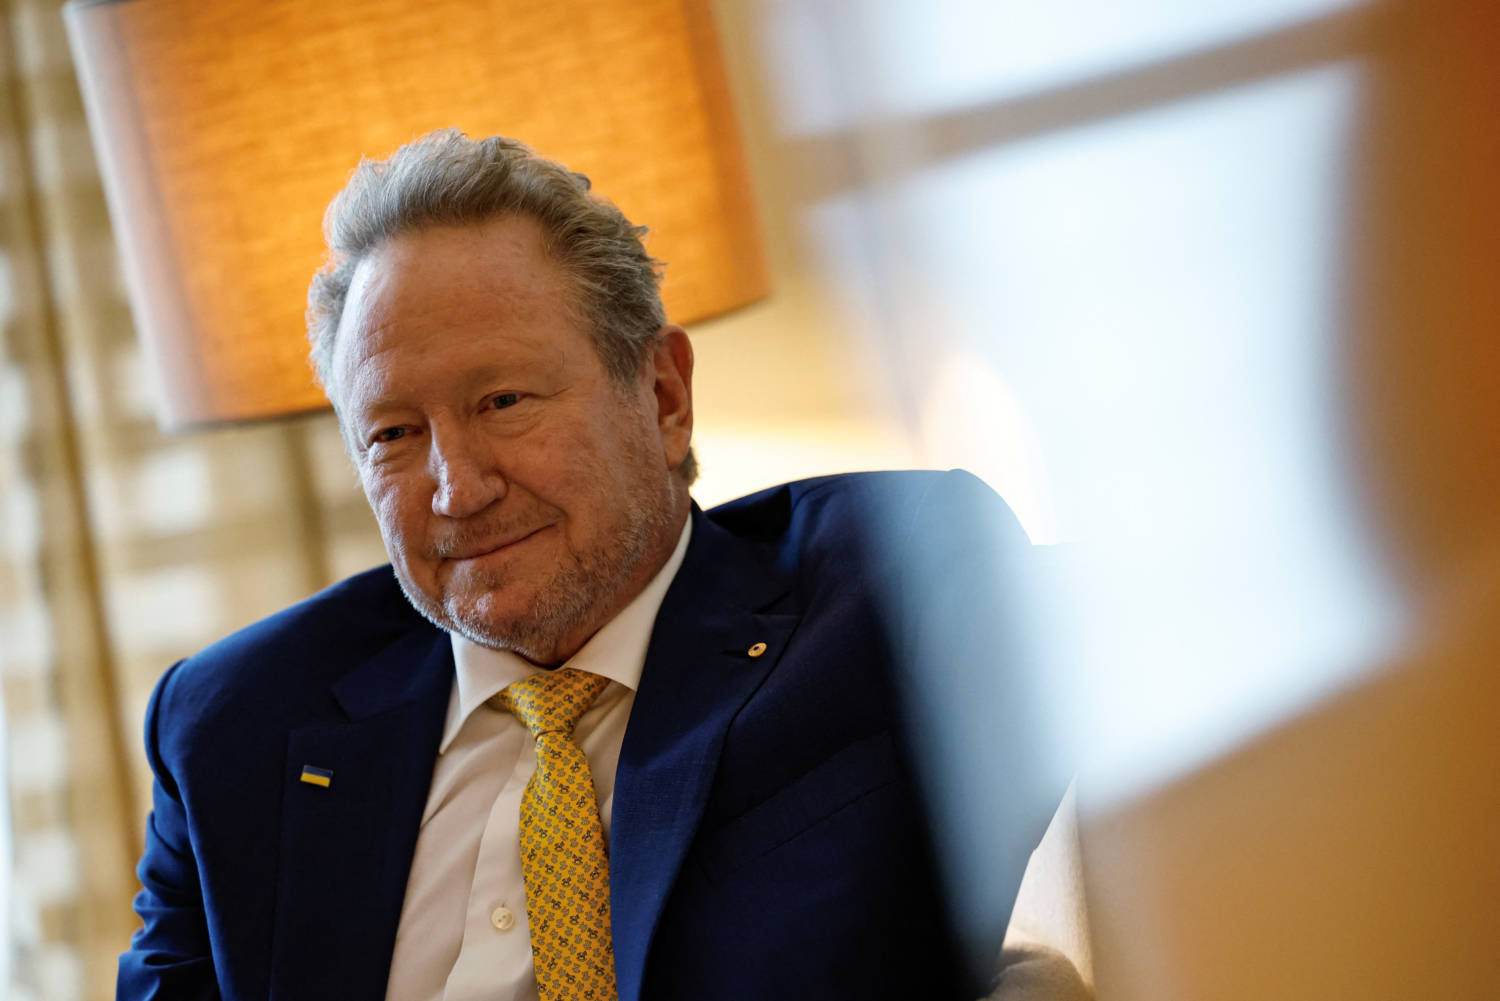 Fortescue's Founder And Executive Chairman Andrew Forrest Speaks During An Interview With Reuters, In Beijing